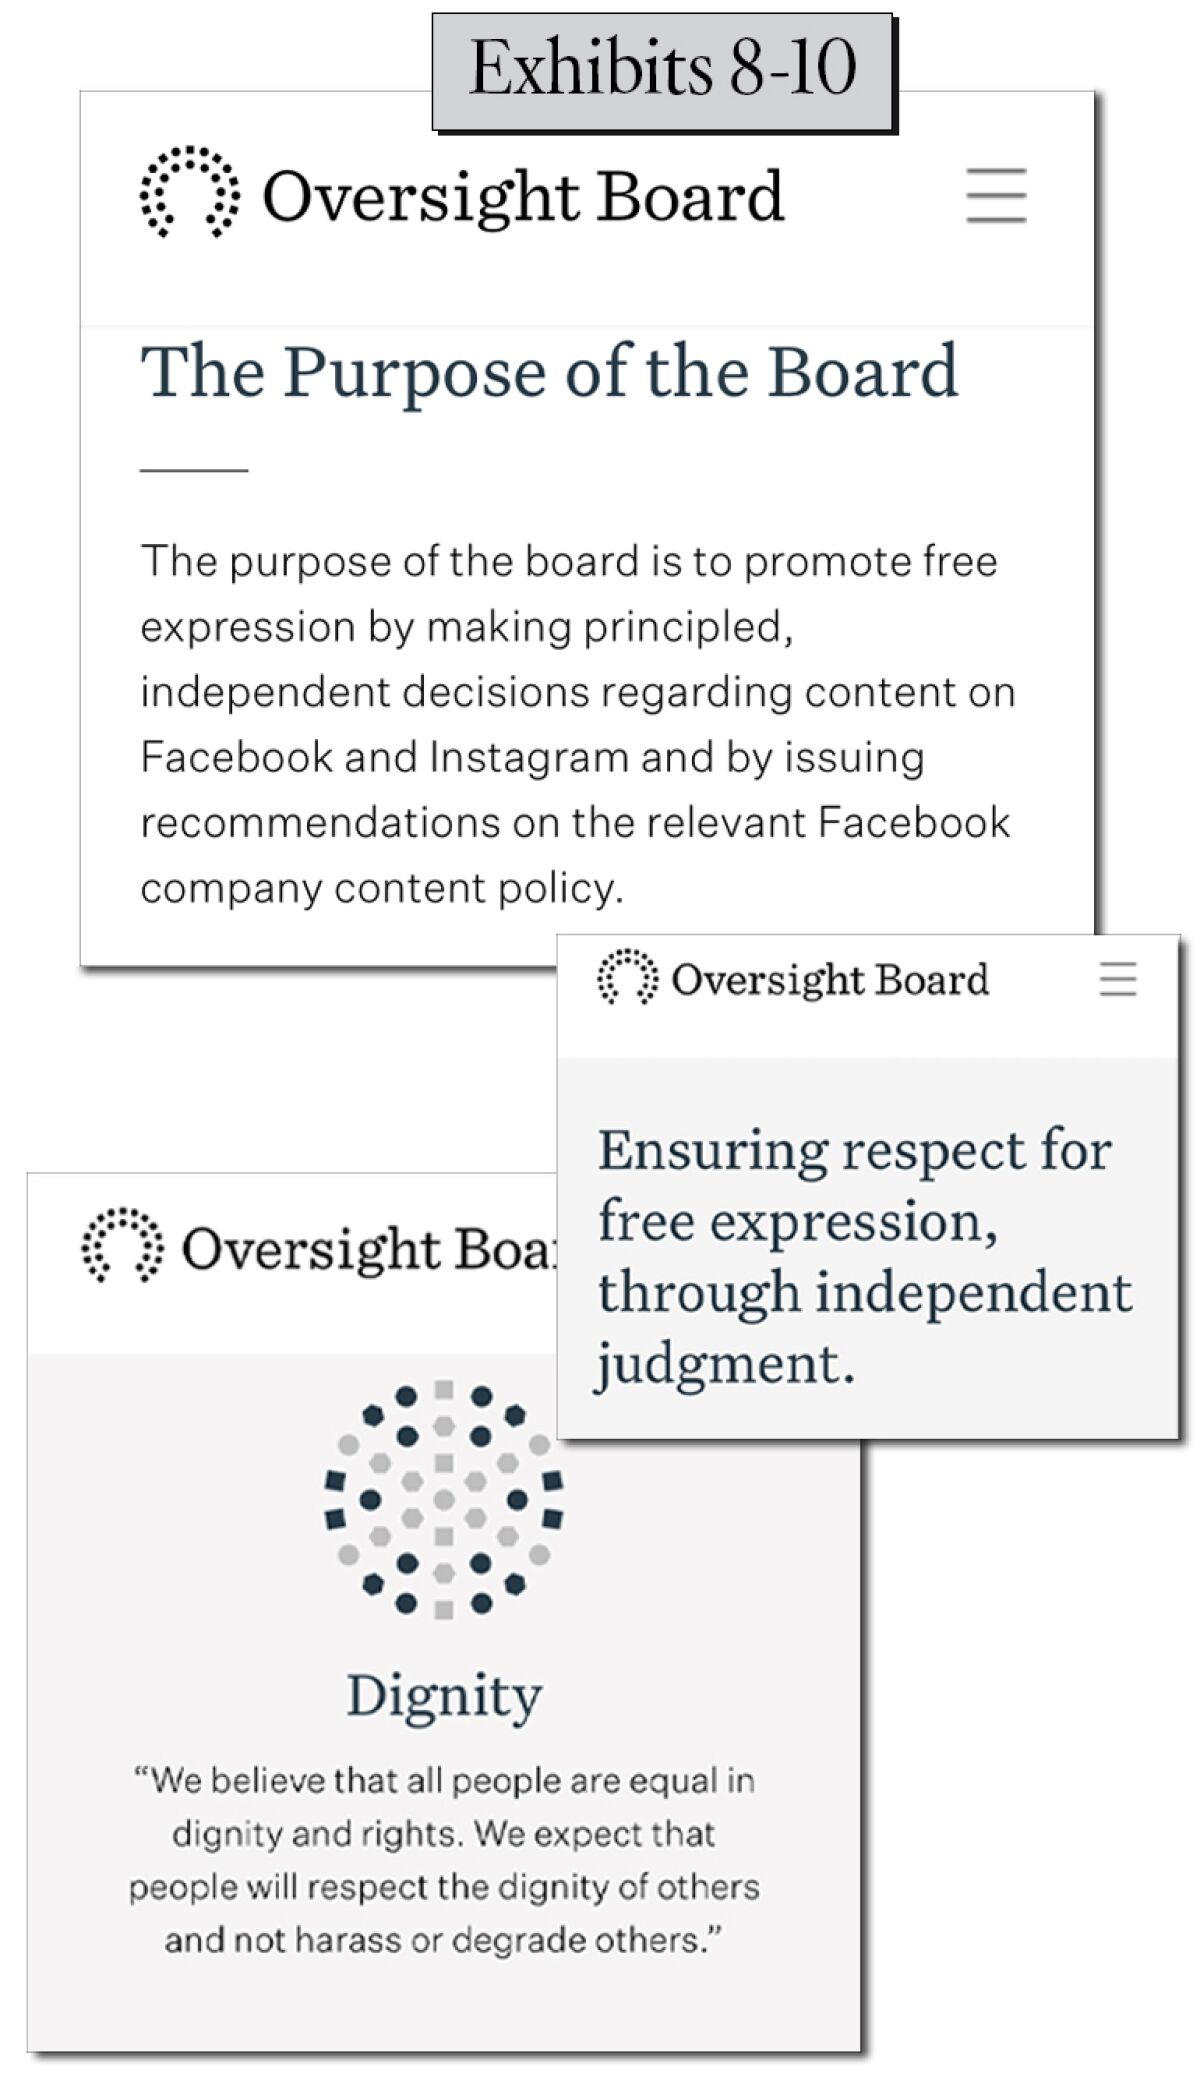 Notifications of "The Purpose of the Board" and "Dignity."